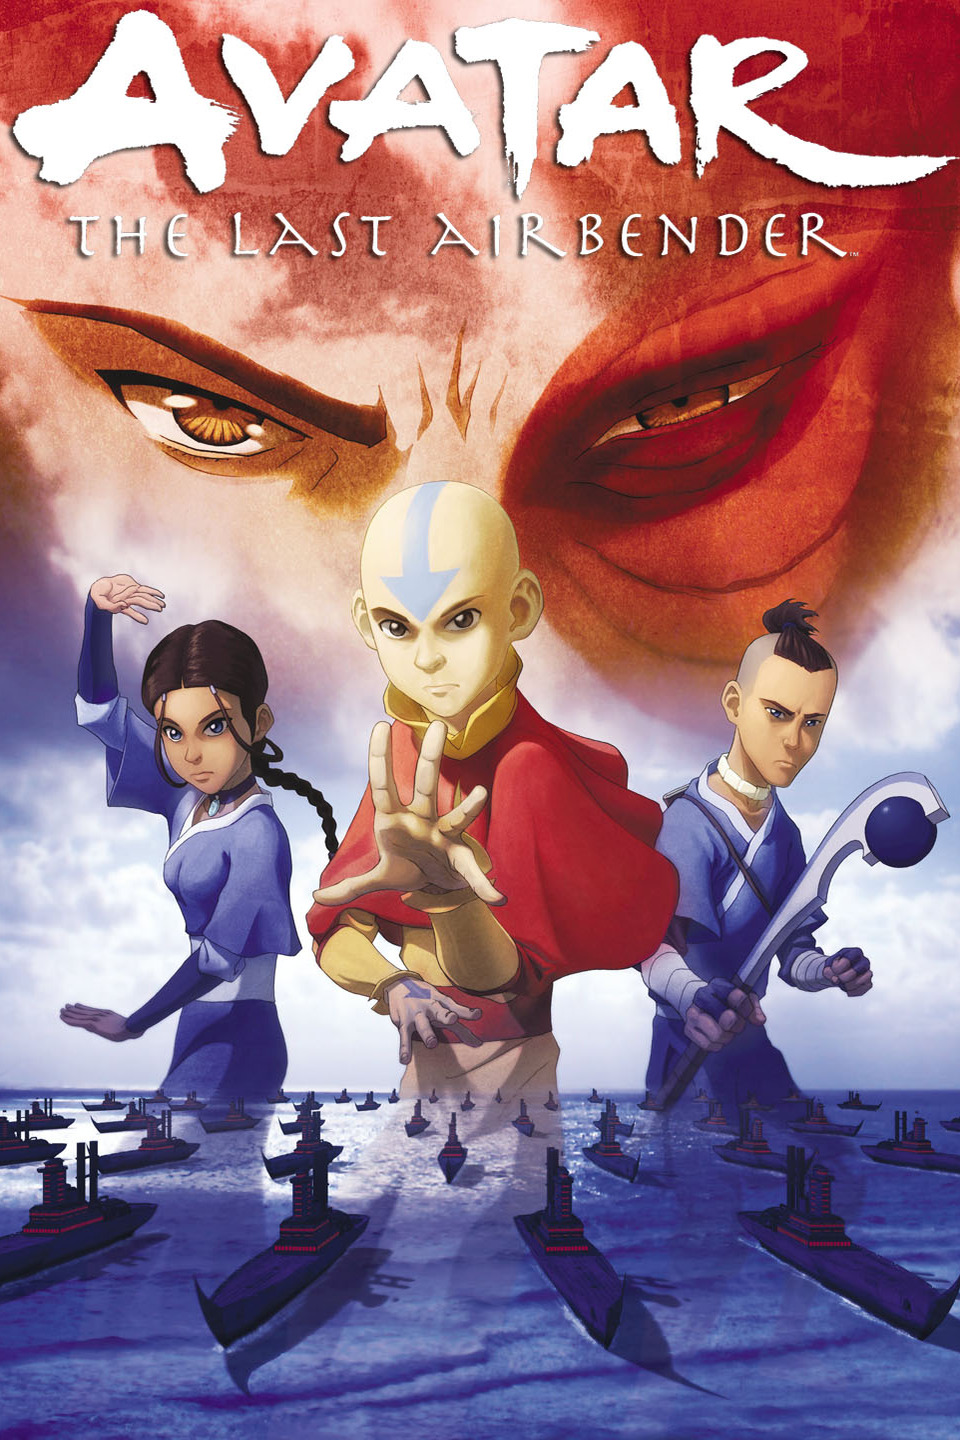 Avatar The Last Airbender movie gets official release date